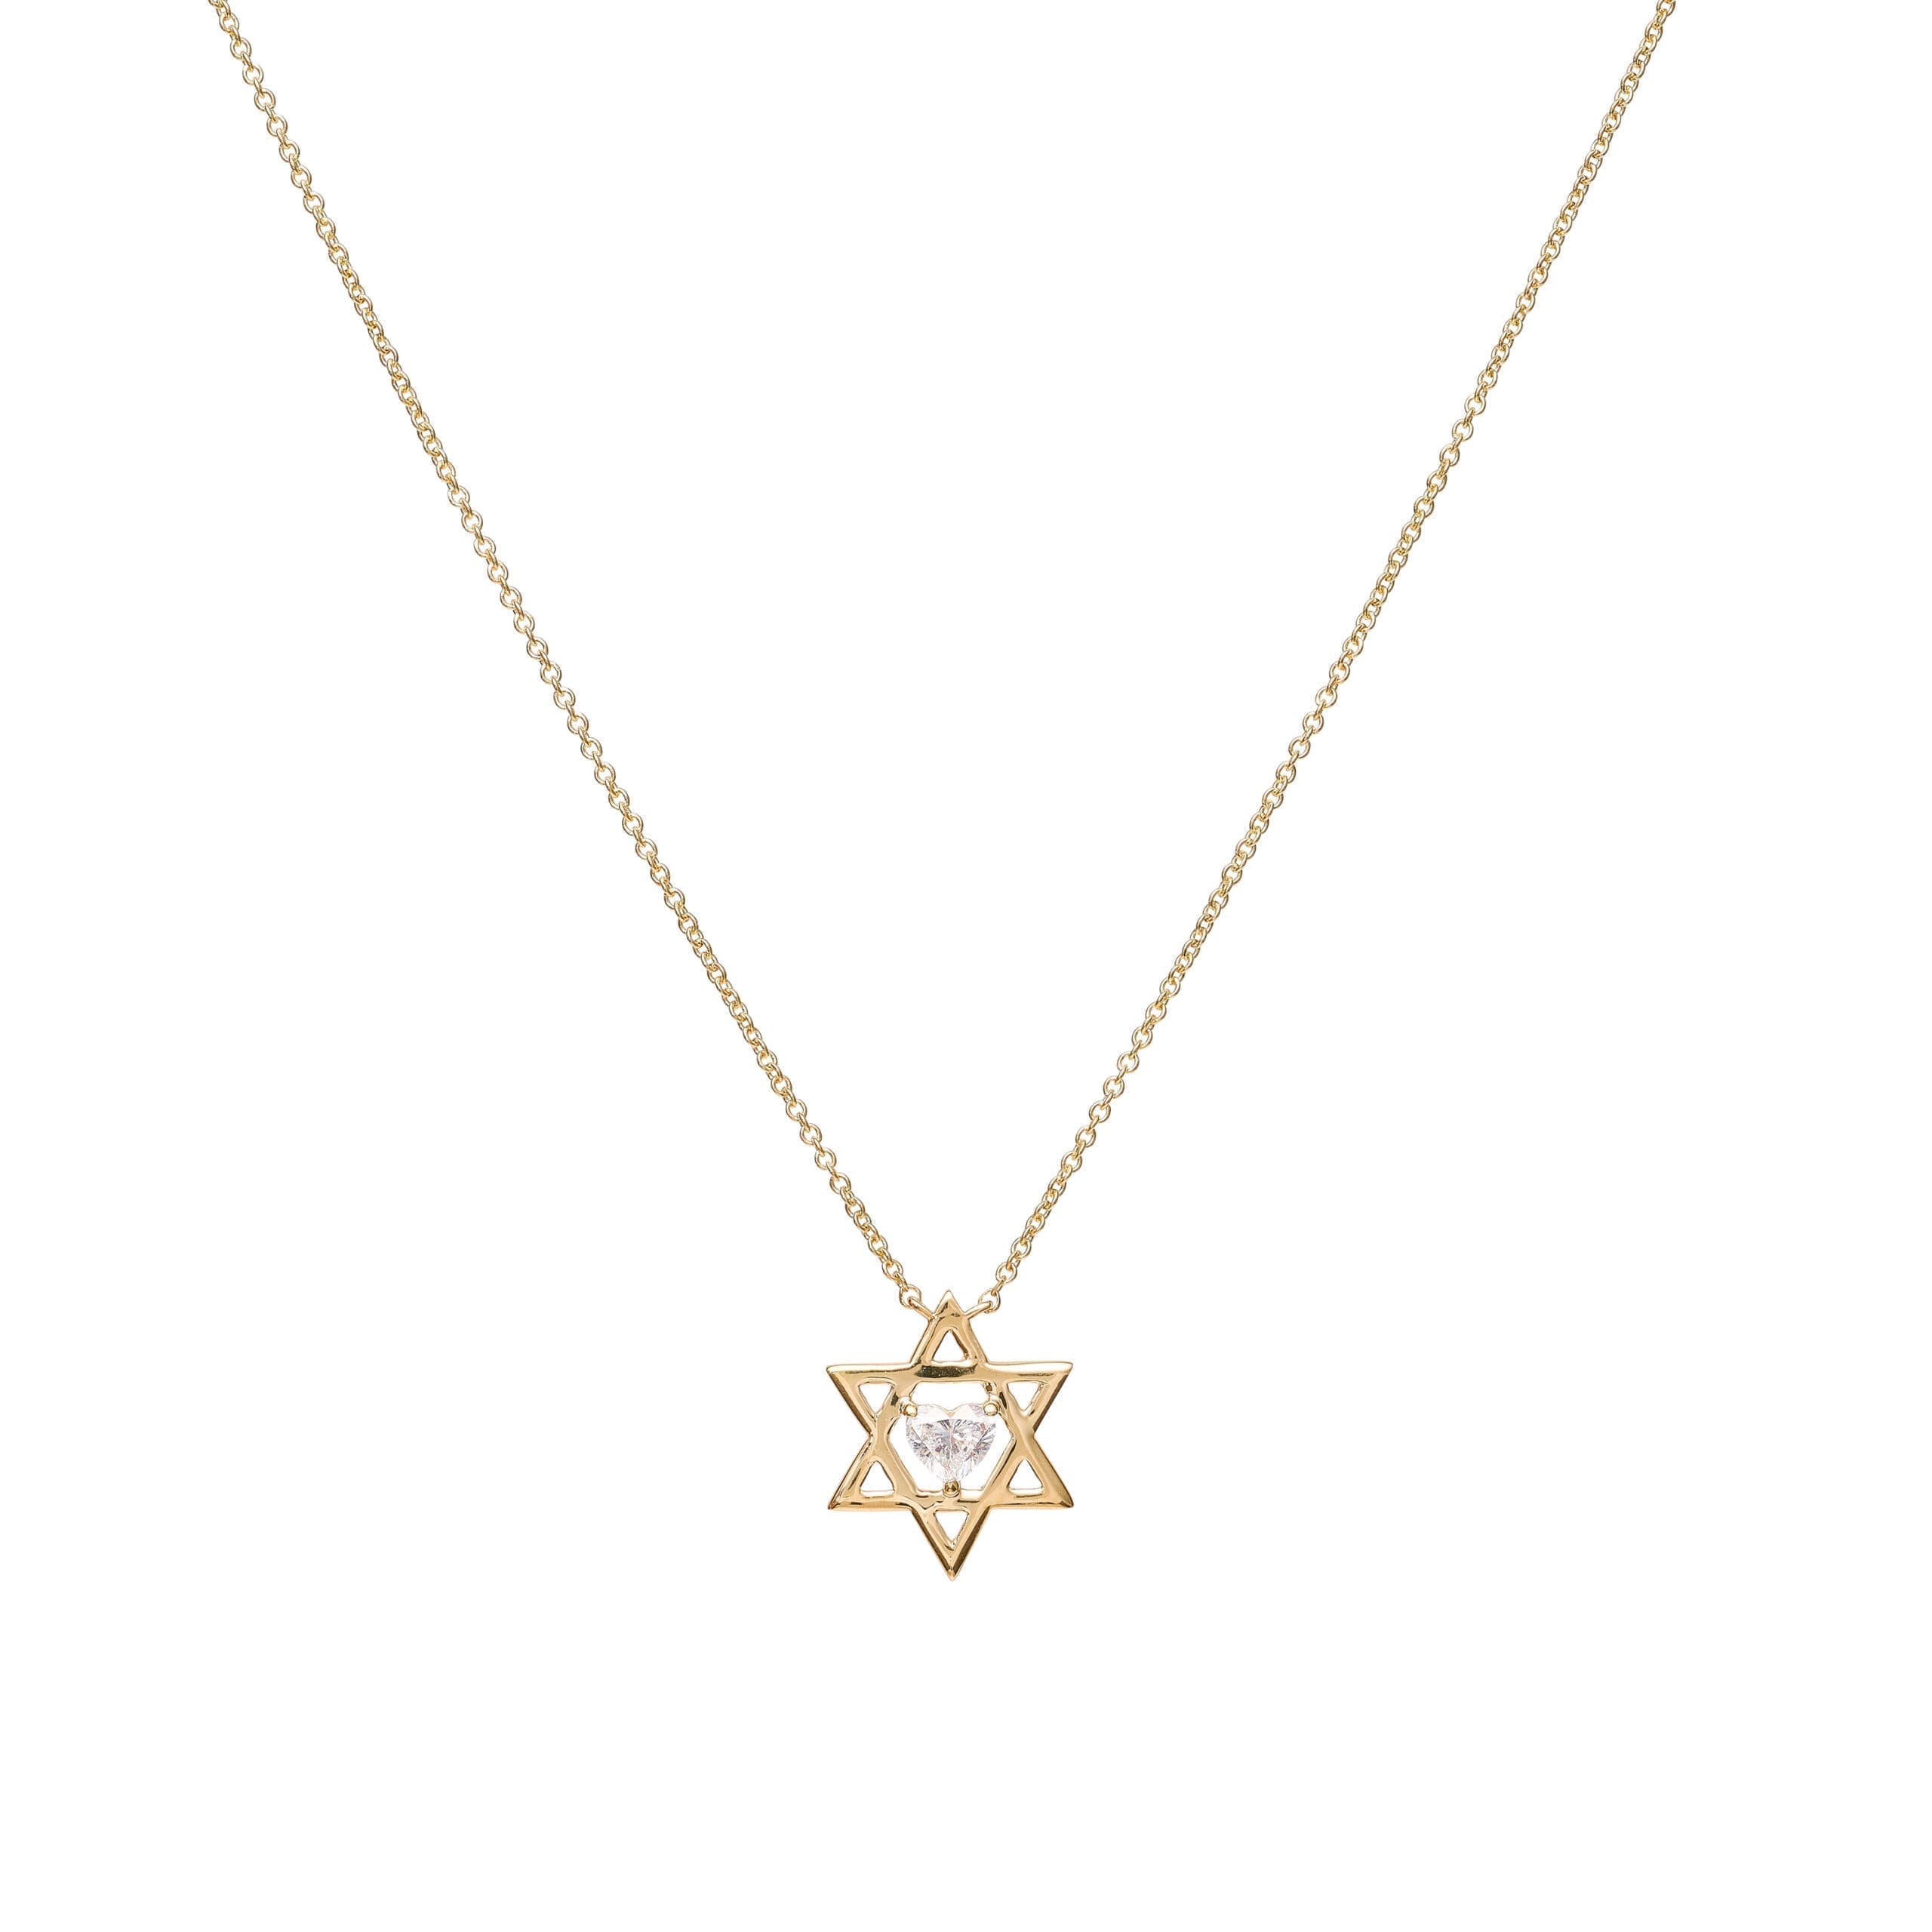 Floating Heart Diamond Star of David Necklace Yellow Gold